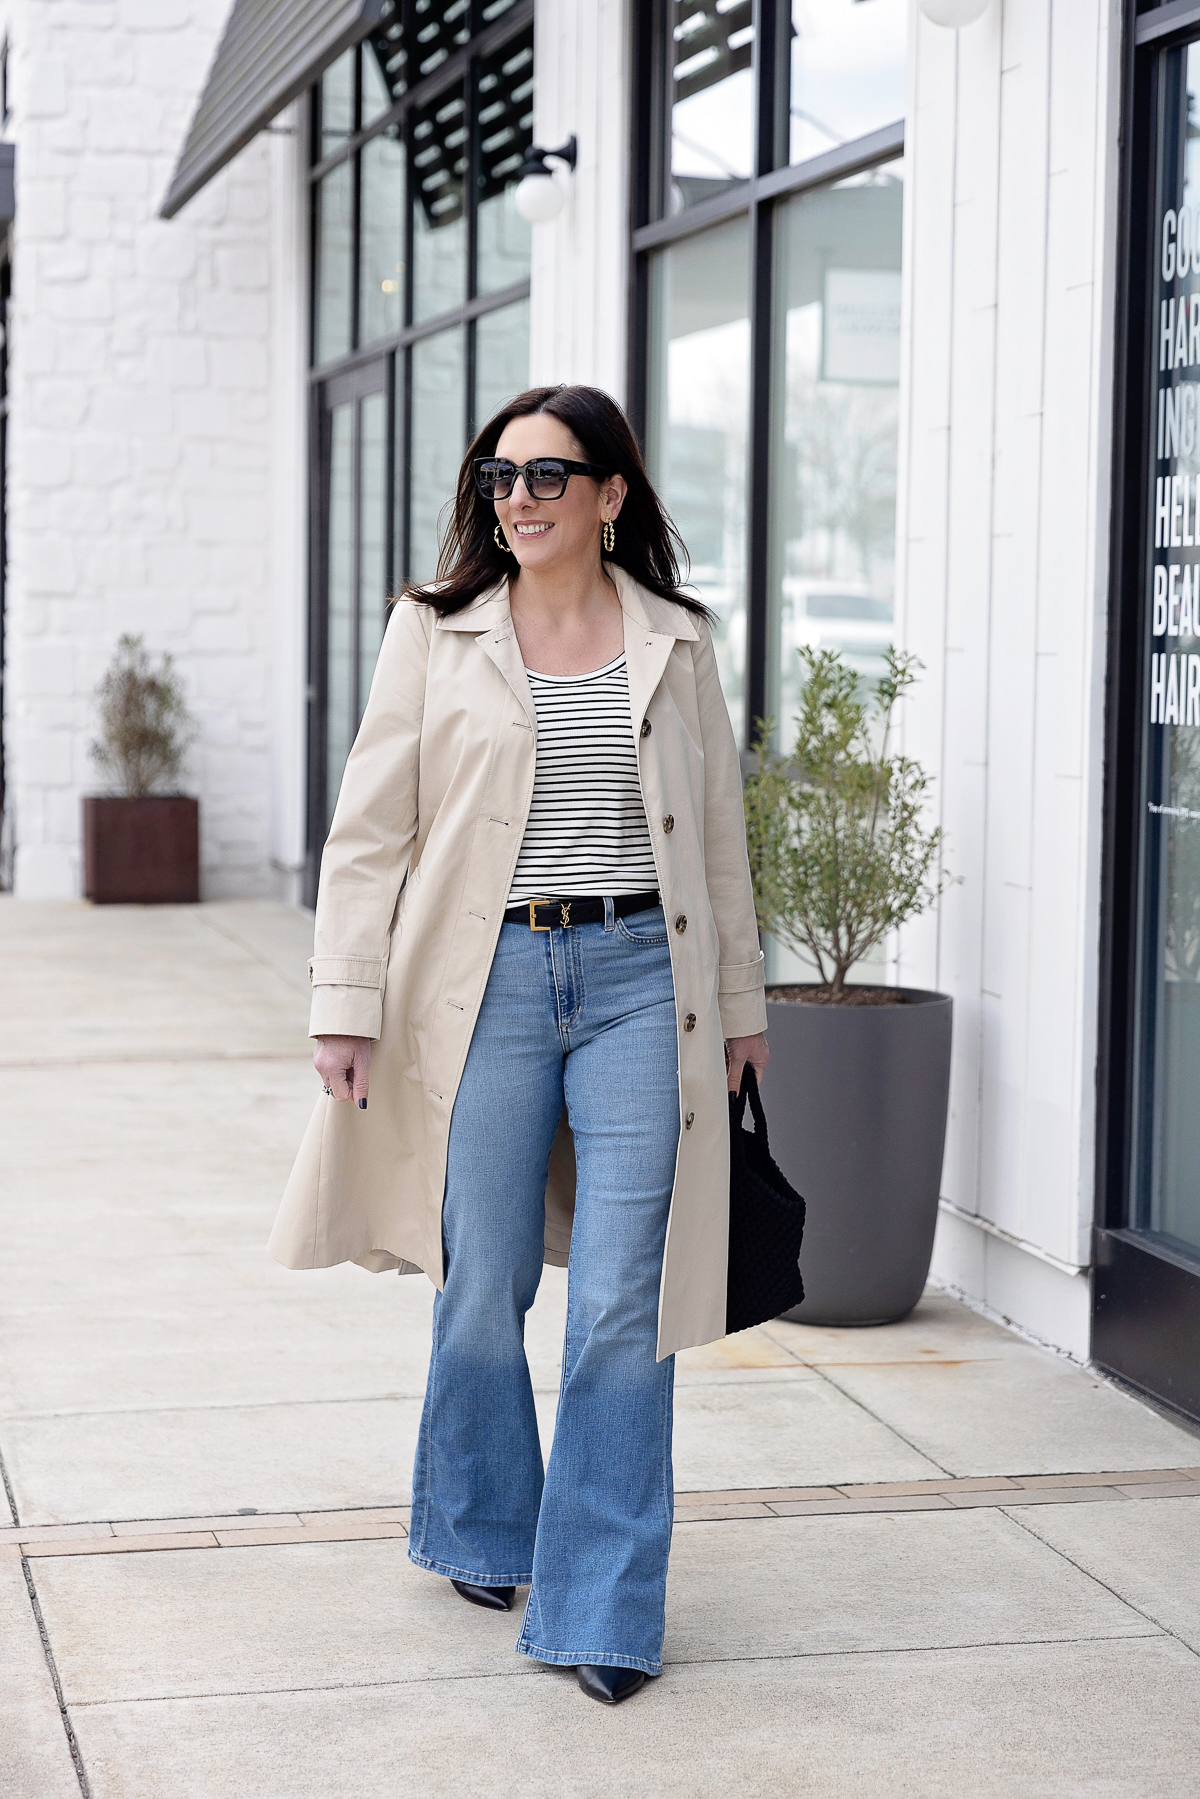 How to Style a Belt with Jeans